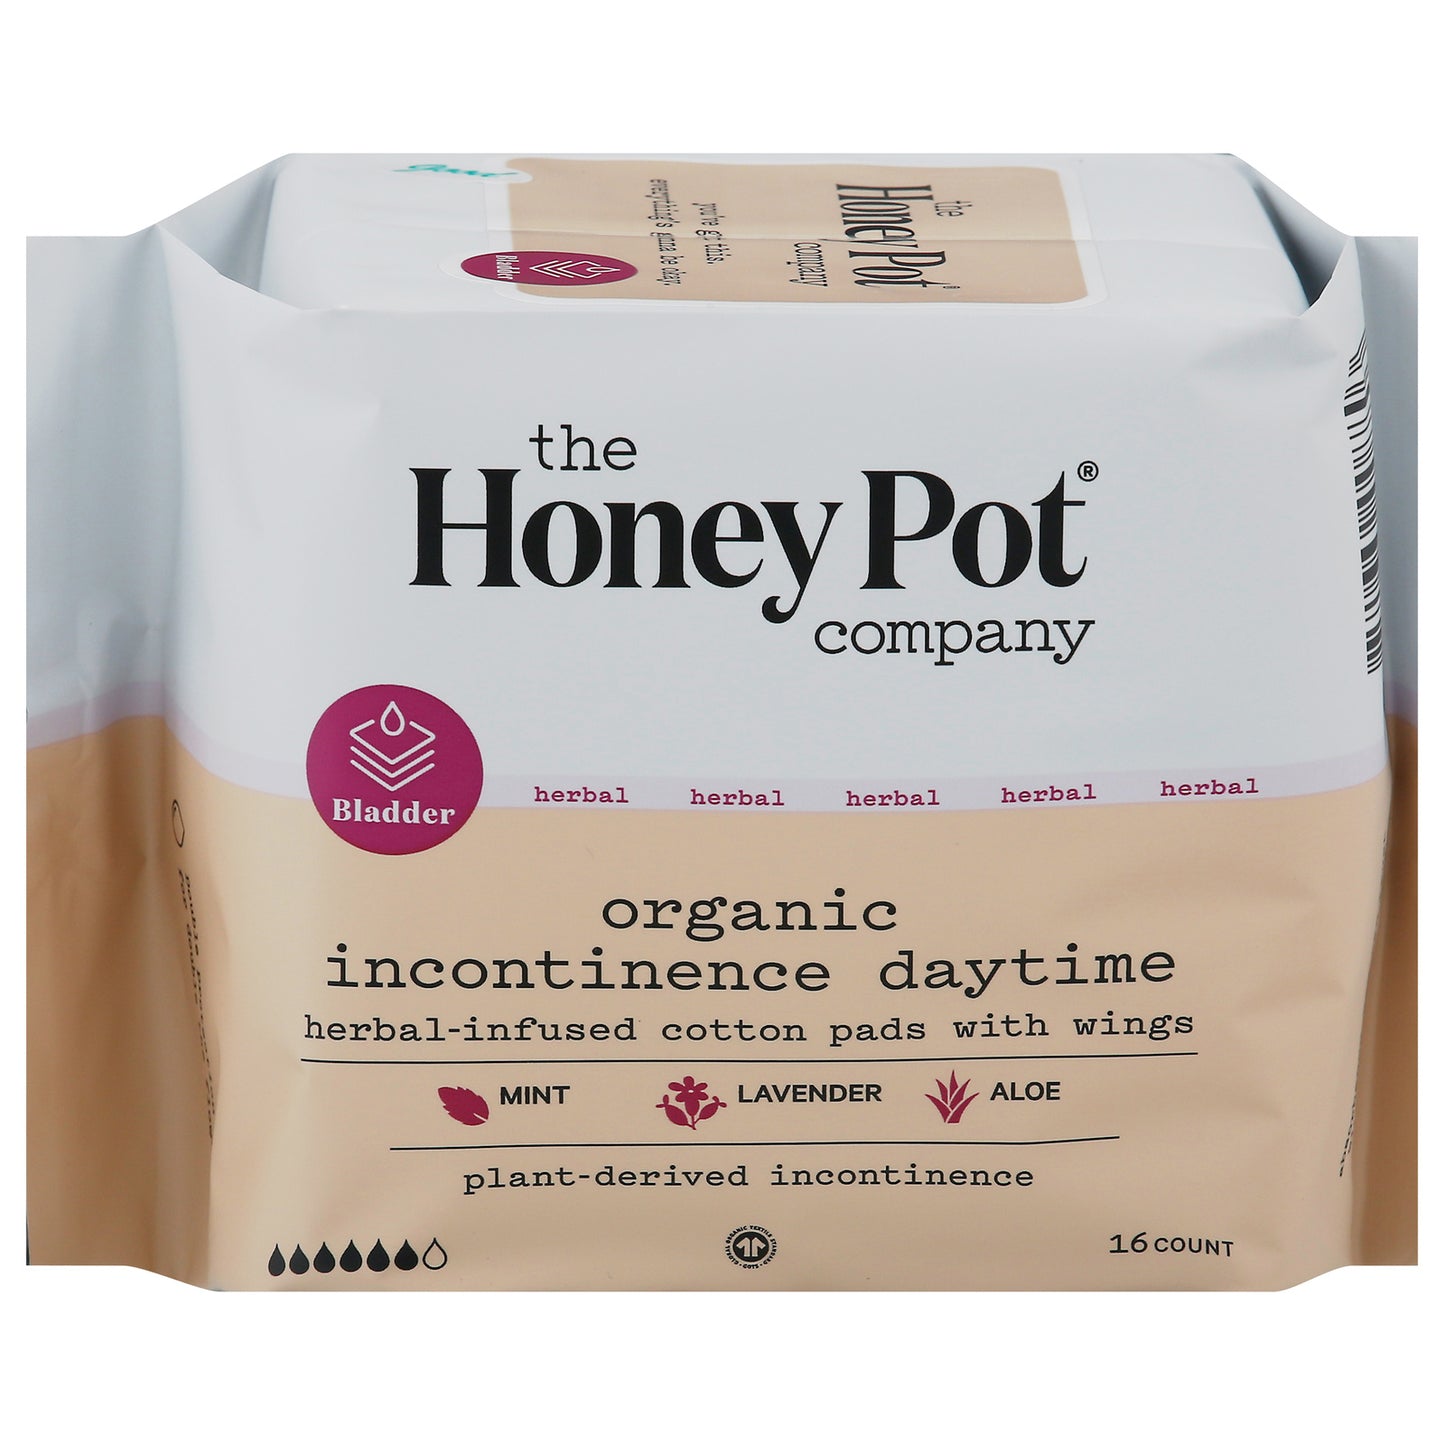 The Honey Pot - Pad Incont Day Herbal - 1 Each-16 Ct